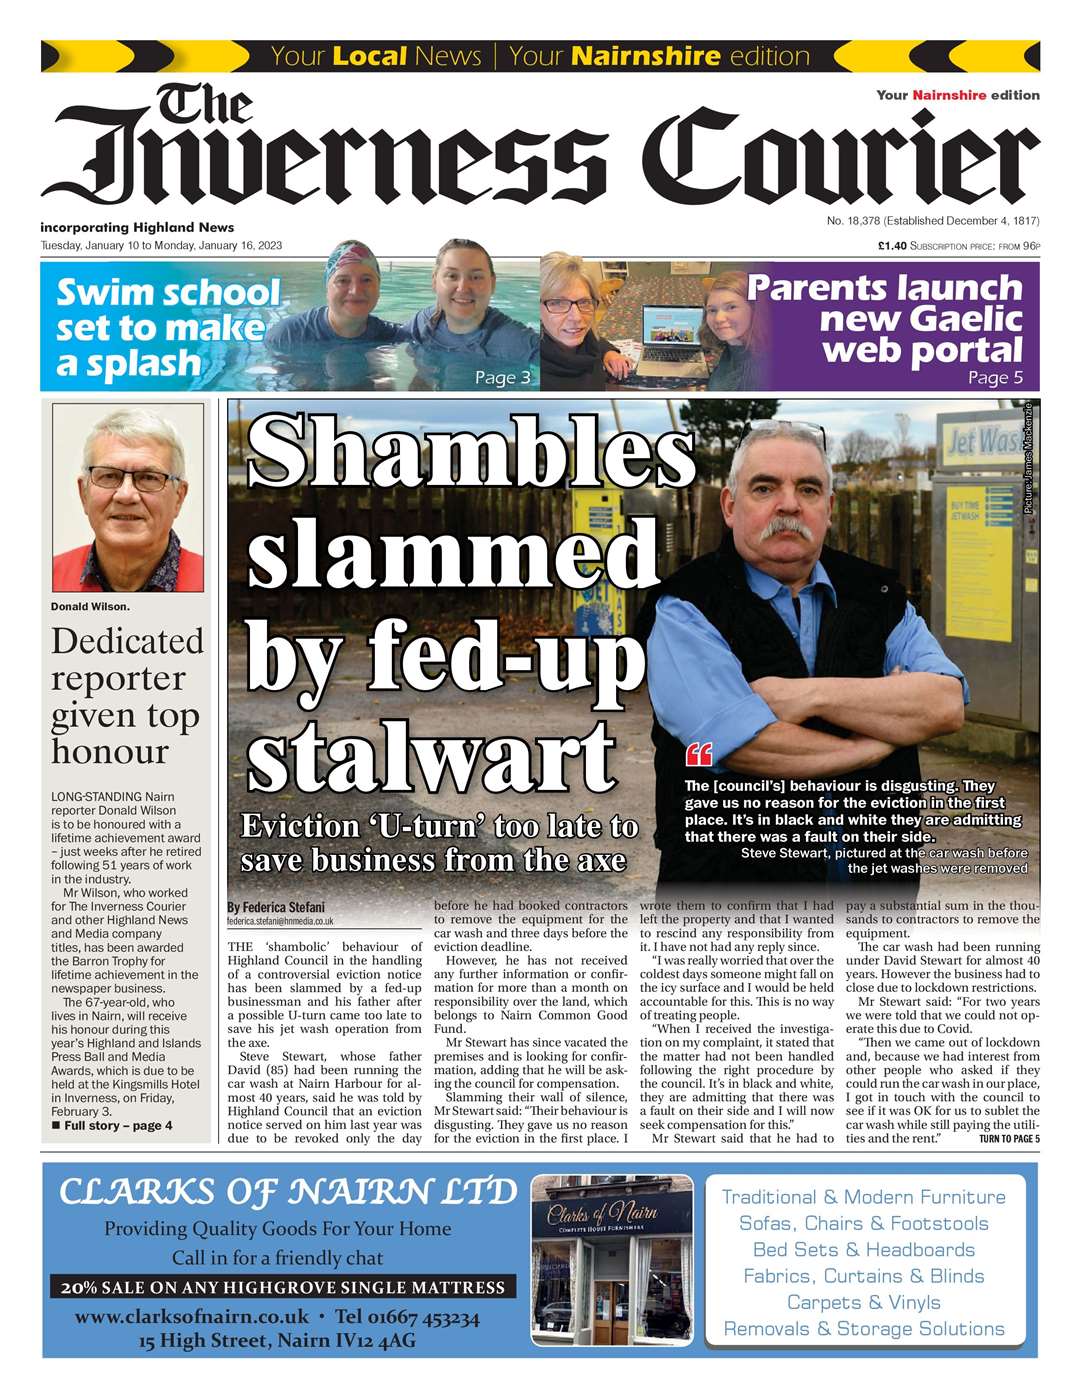 The Inverness Courier (Nairnshire edition), January 10, front page.